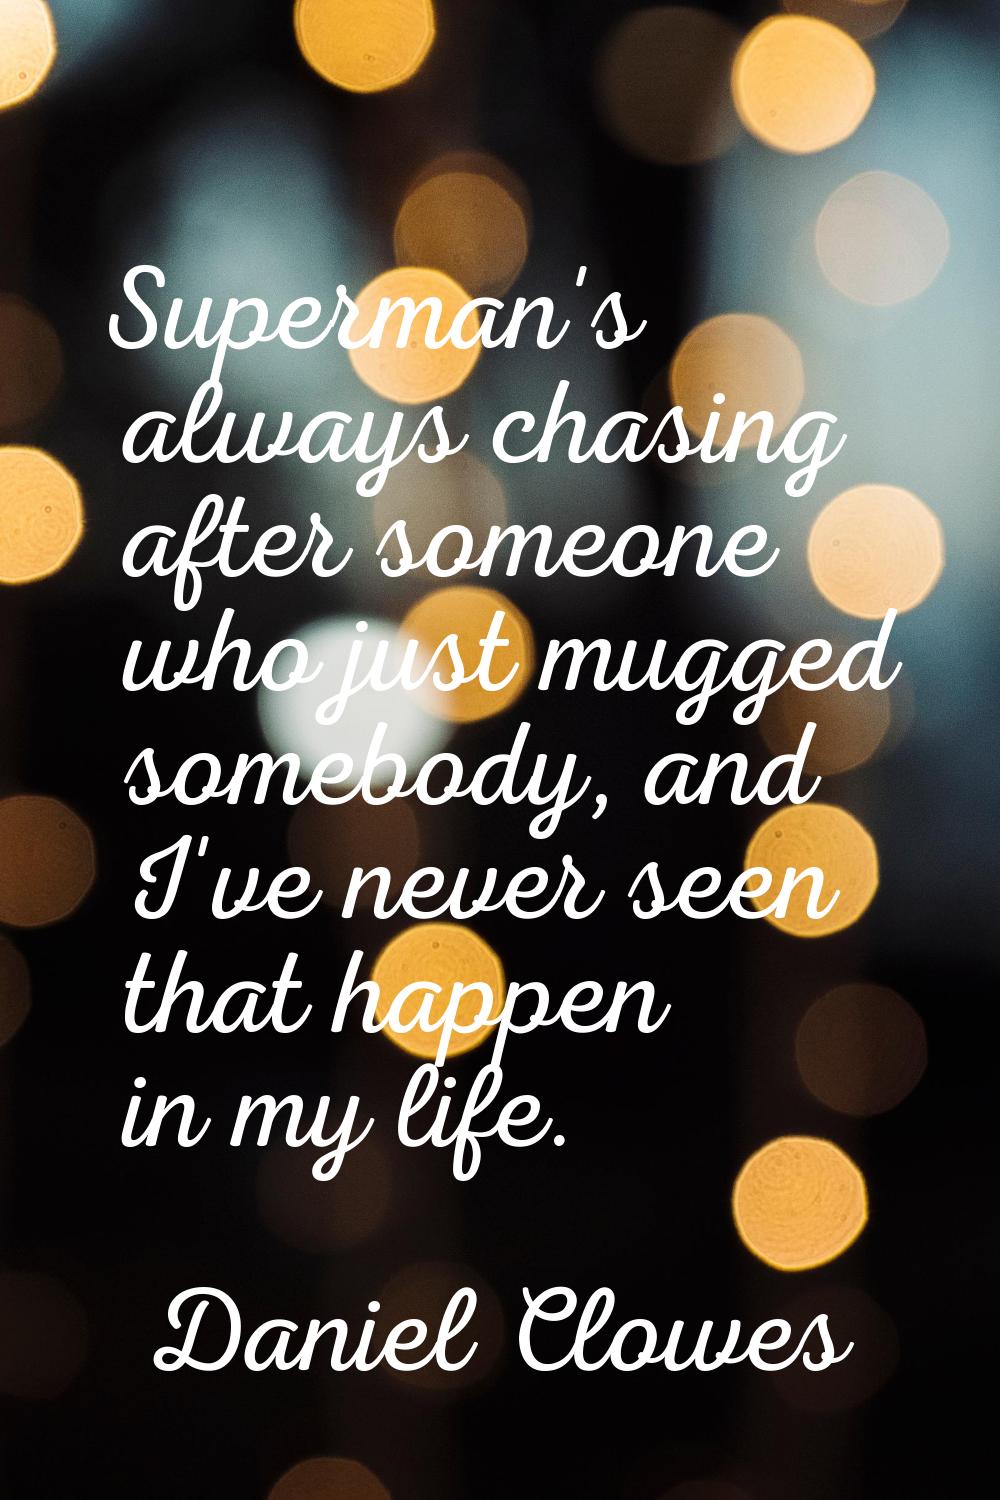 Superman's always chasing after someone who just mugged somebody, and I've never seen that happen i